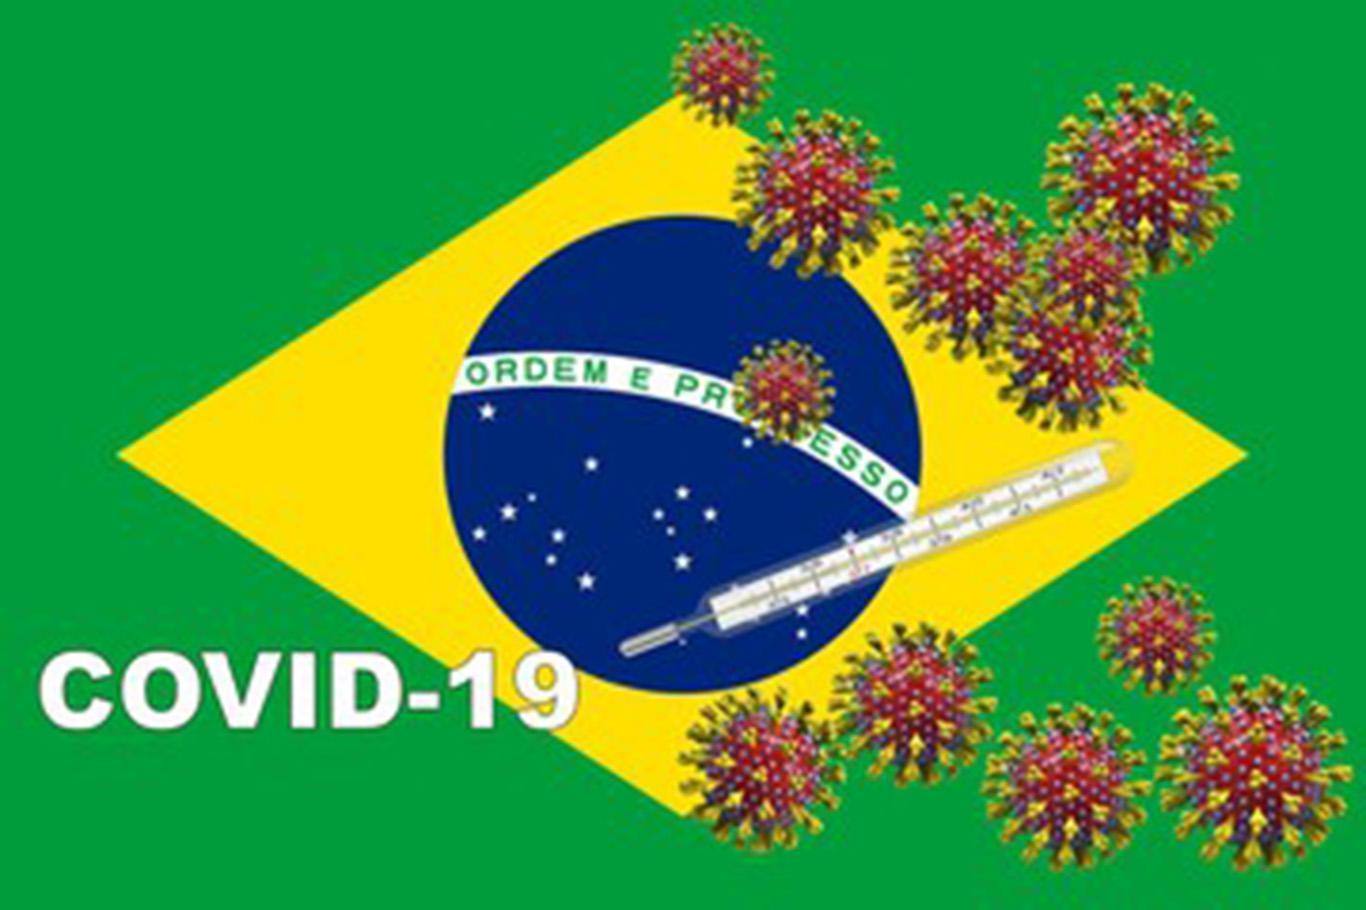 Brazil: 1,001 people die from coronavirus over the past 24 hours